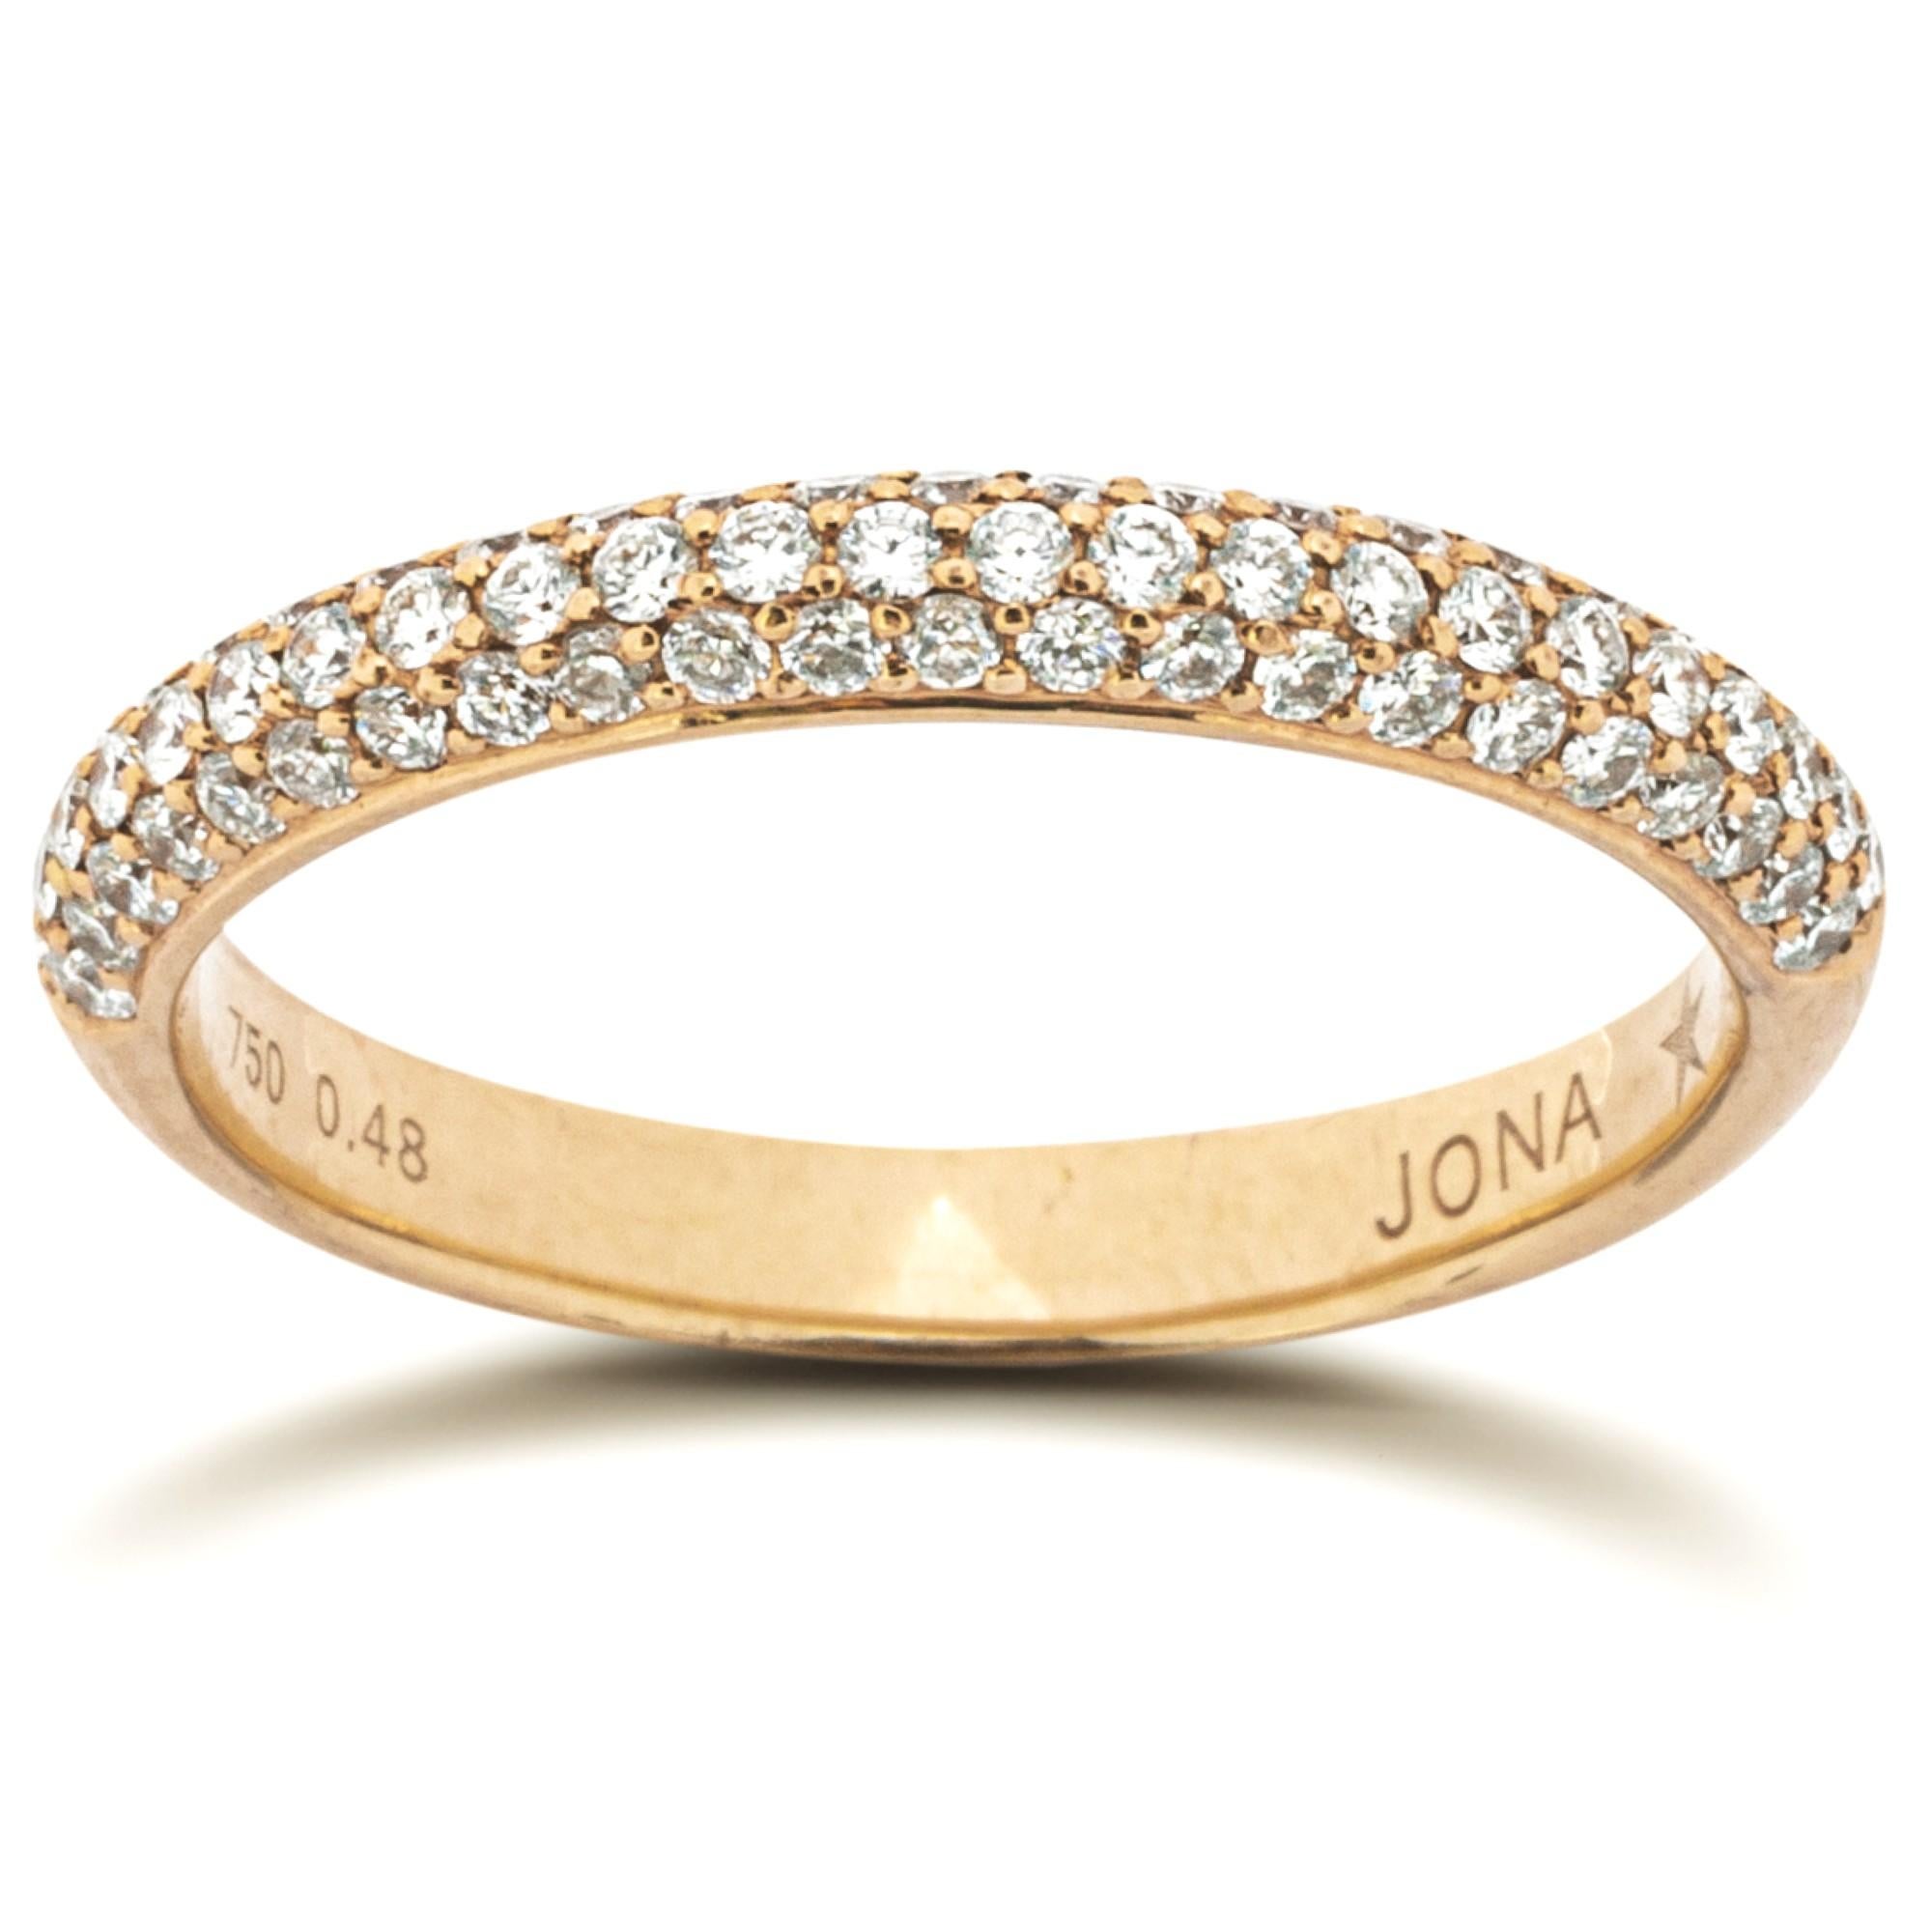 Alex Jona White Diamond 18 Karat Rose Gold Band Ring In New Condition For Sale In Torino, IT